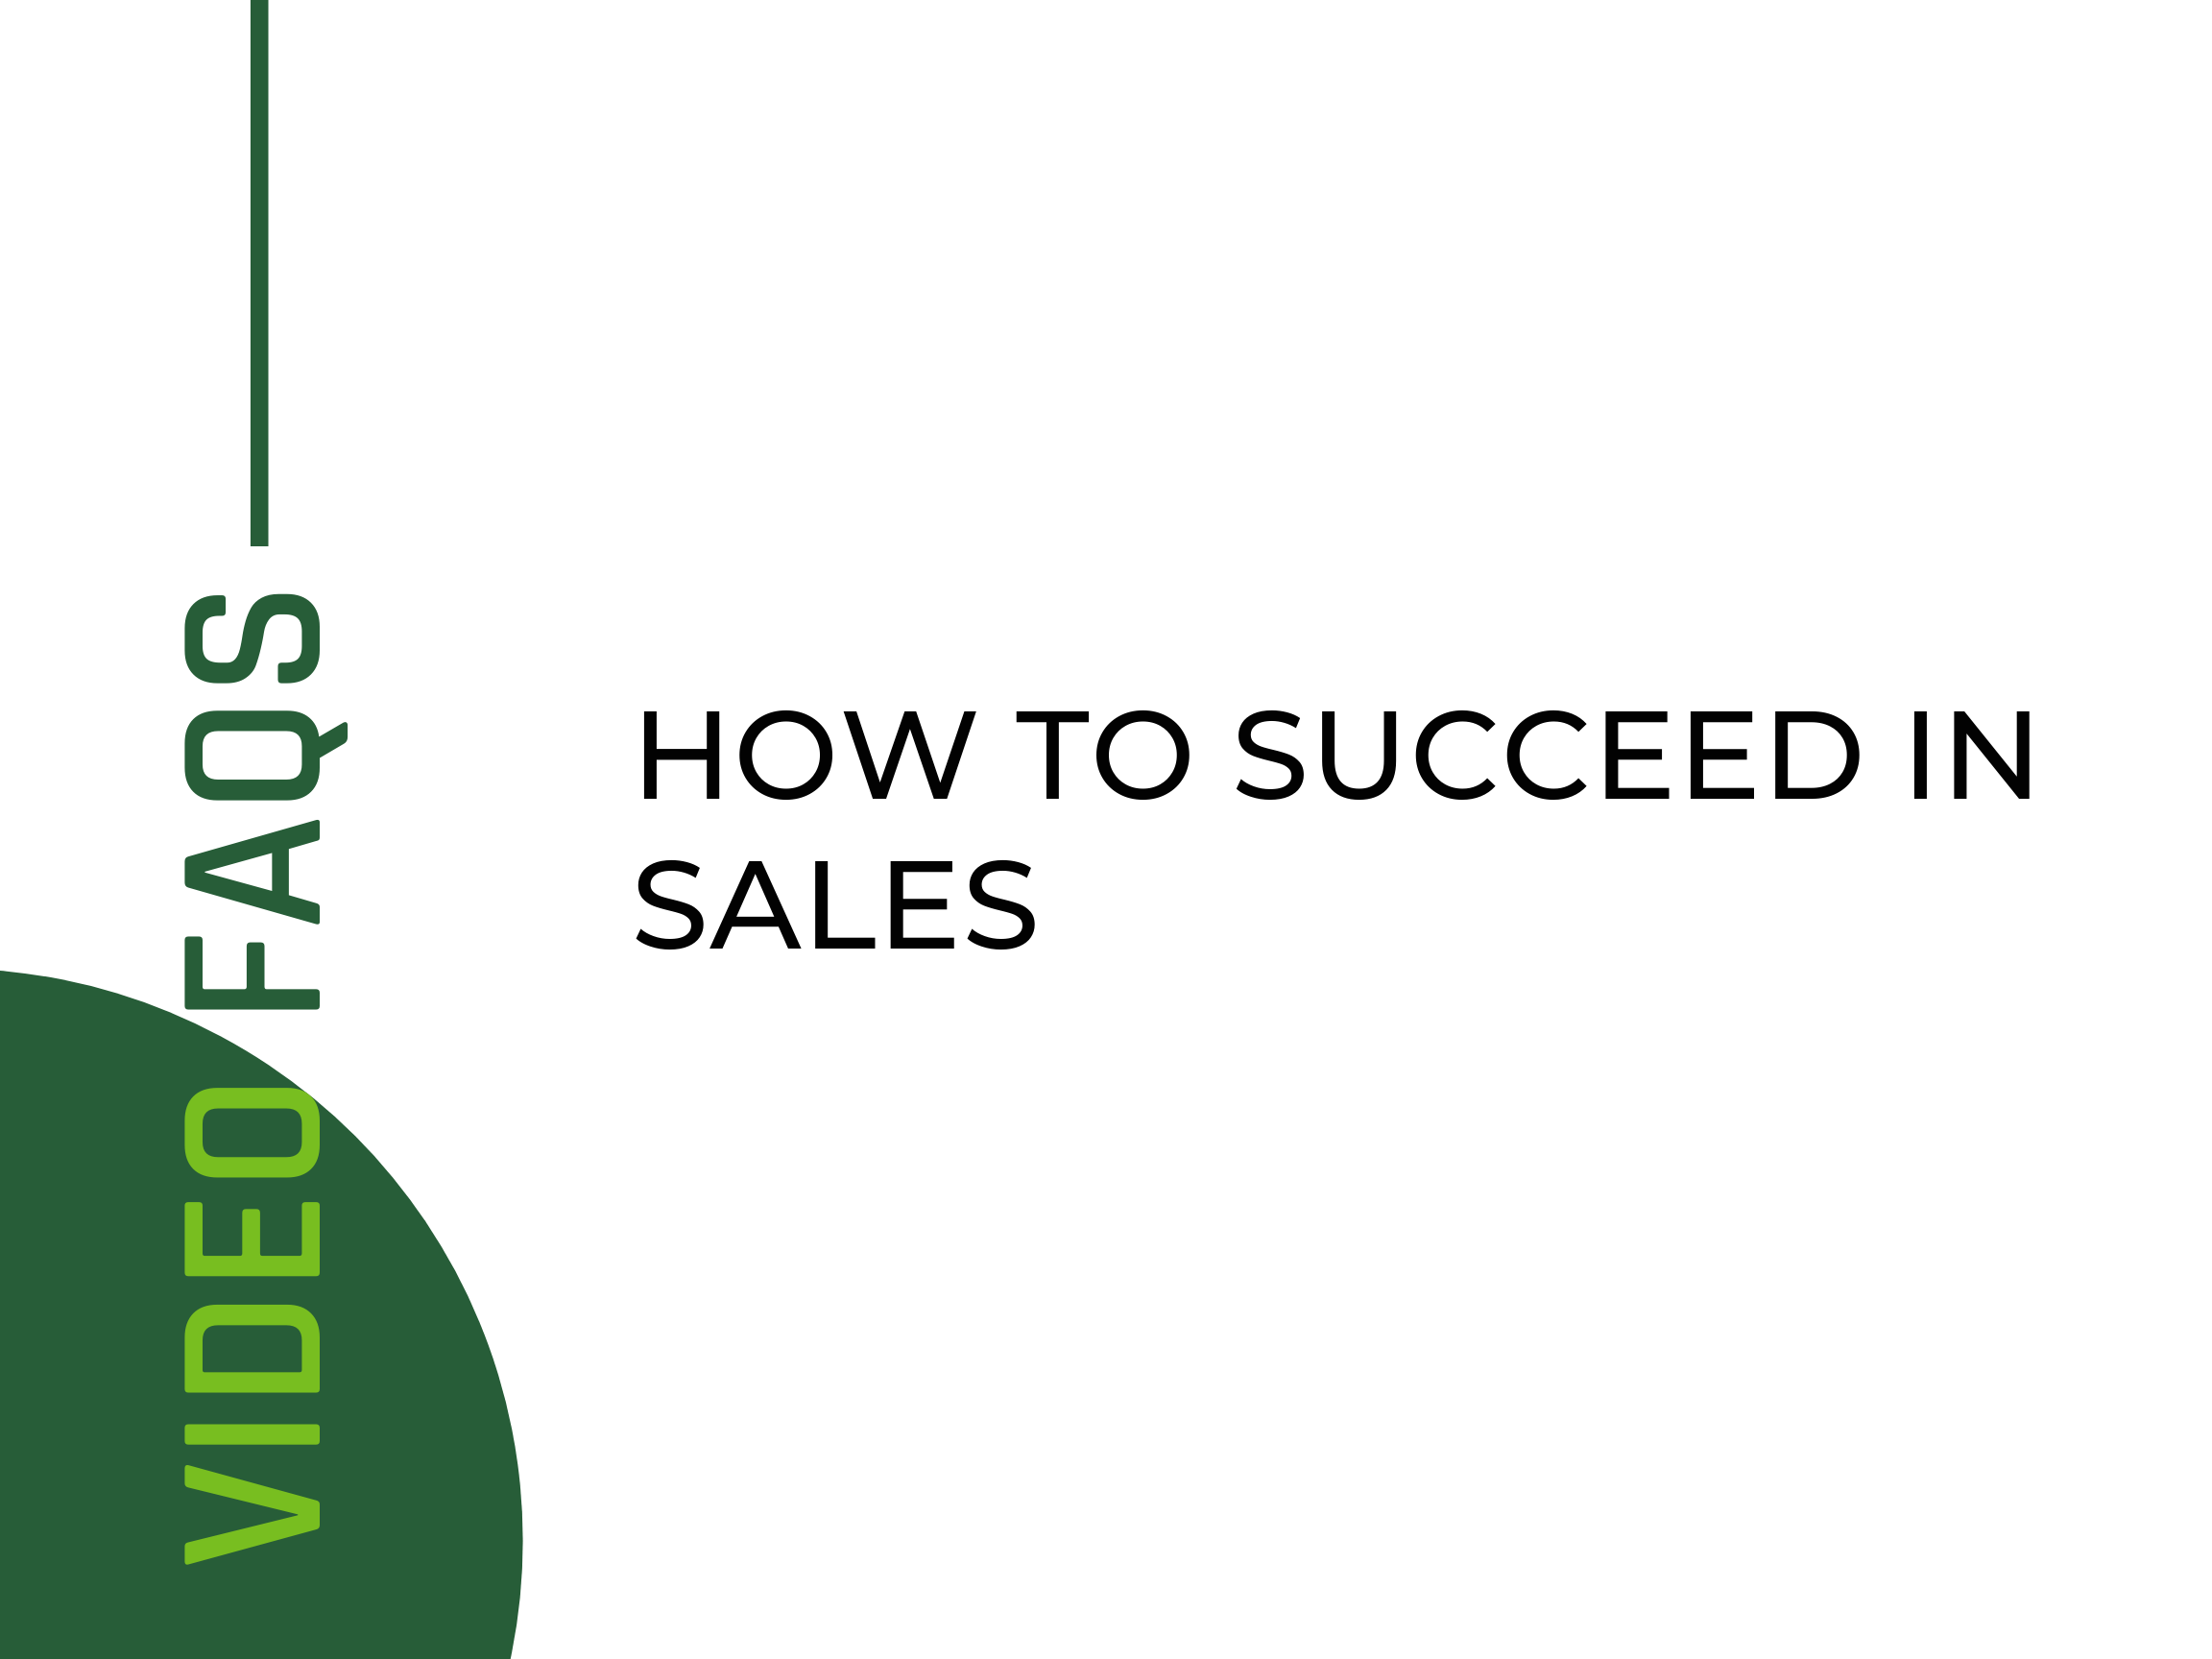 How to succeed in sales